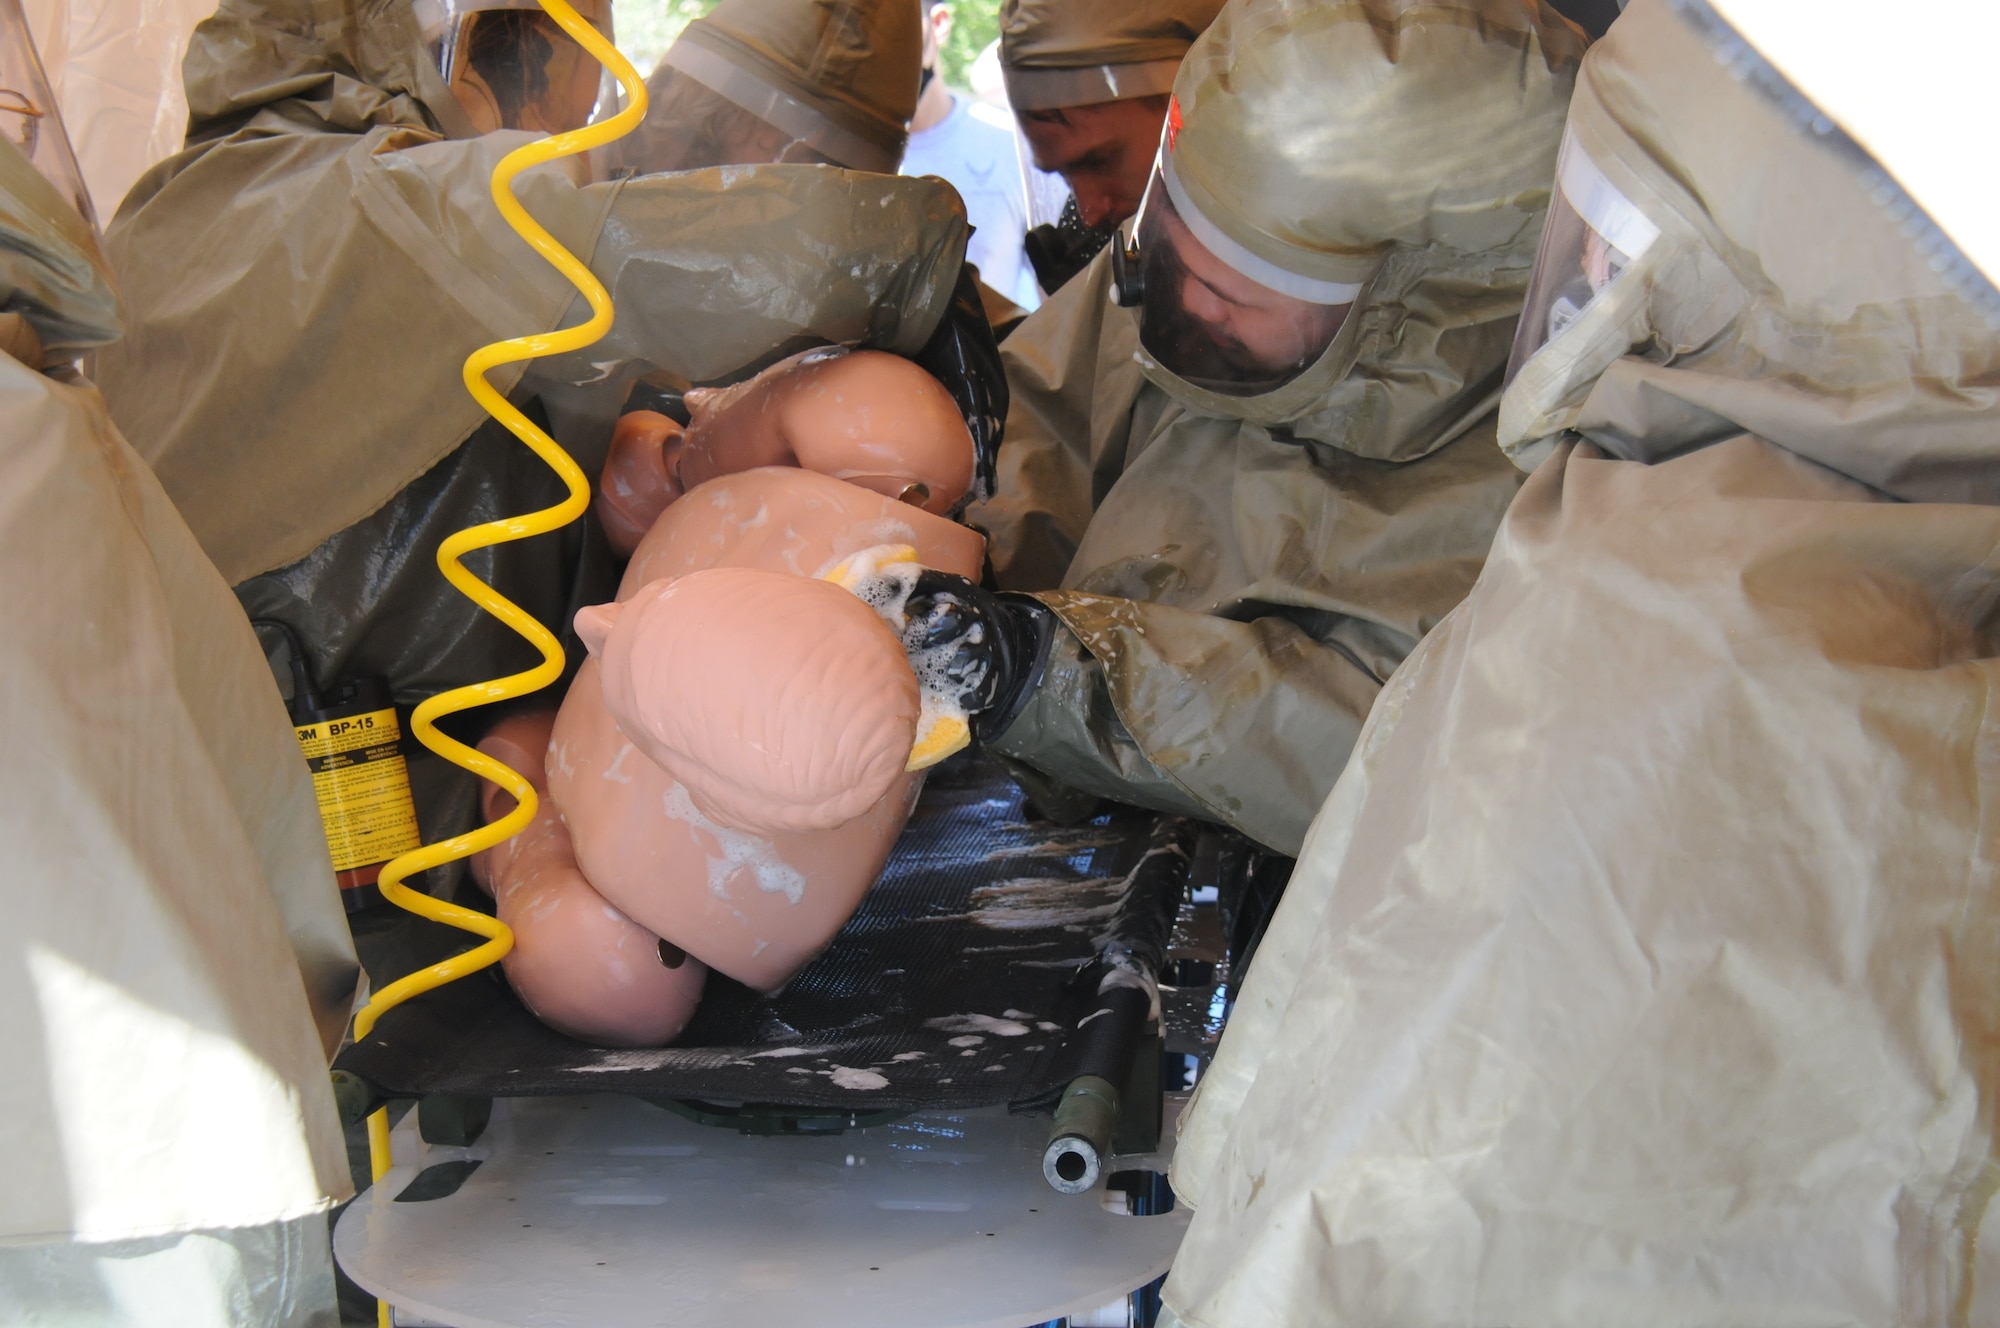 A military medical team decontaminates a simulated patient during an exercise.